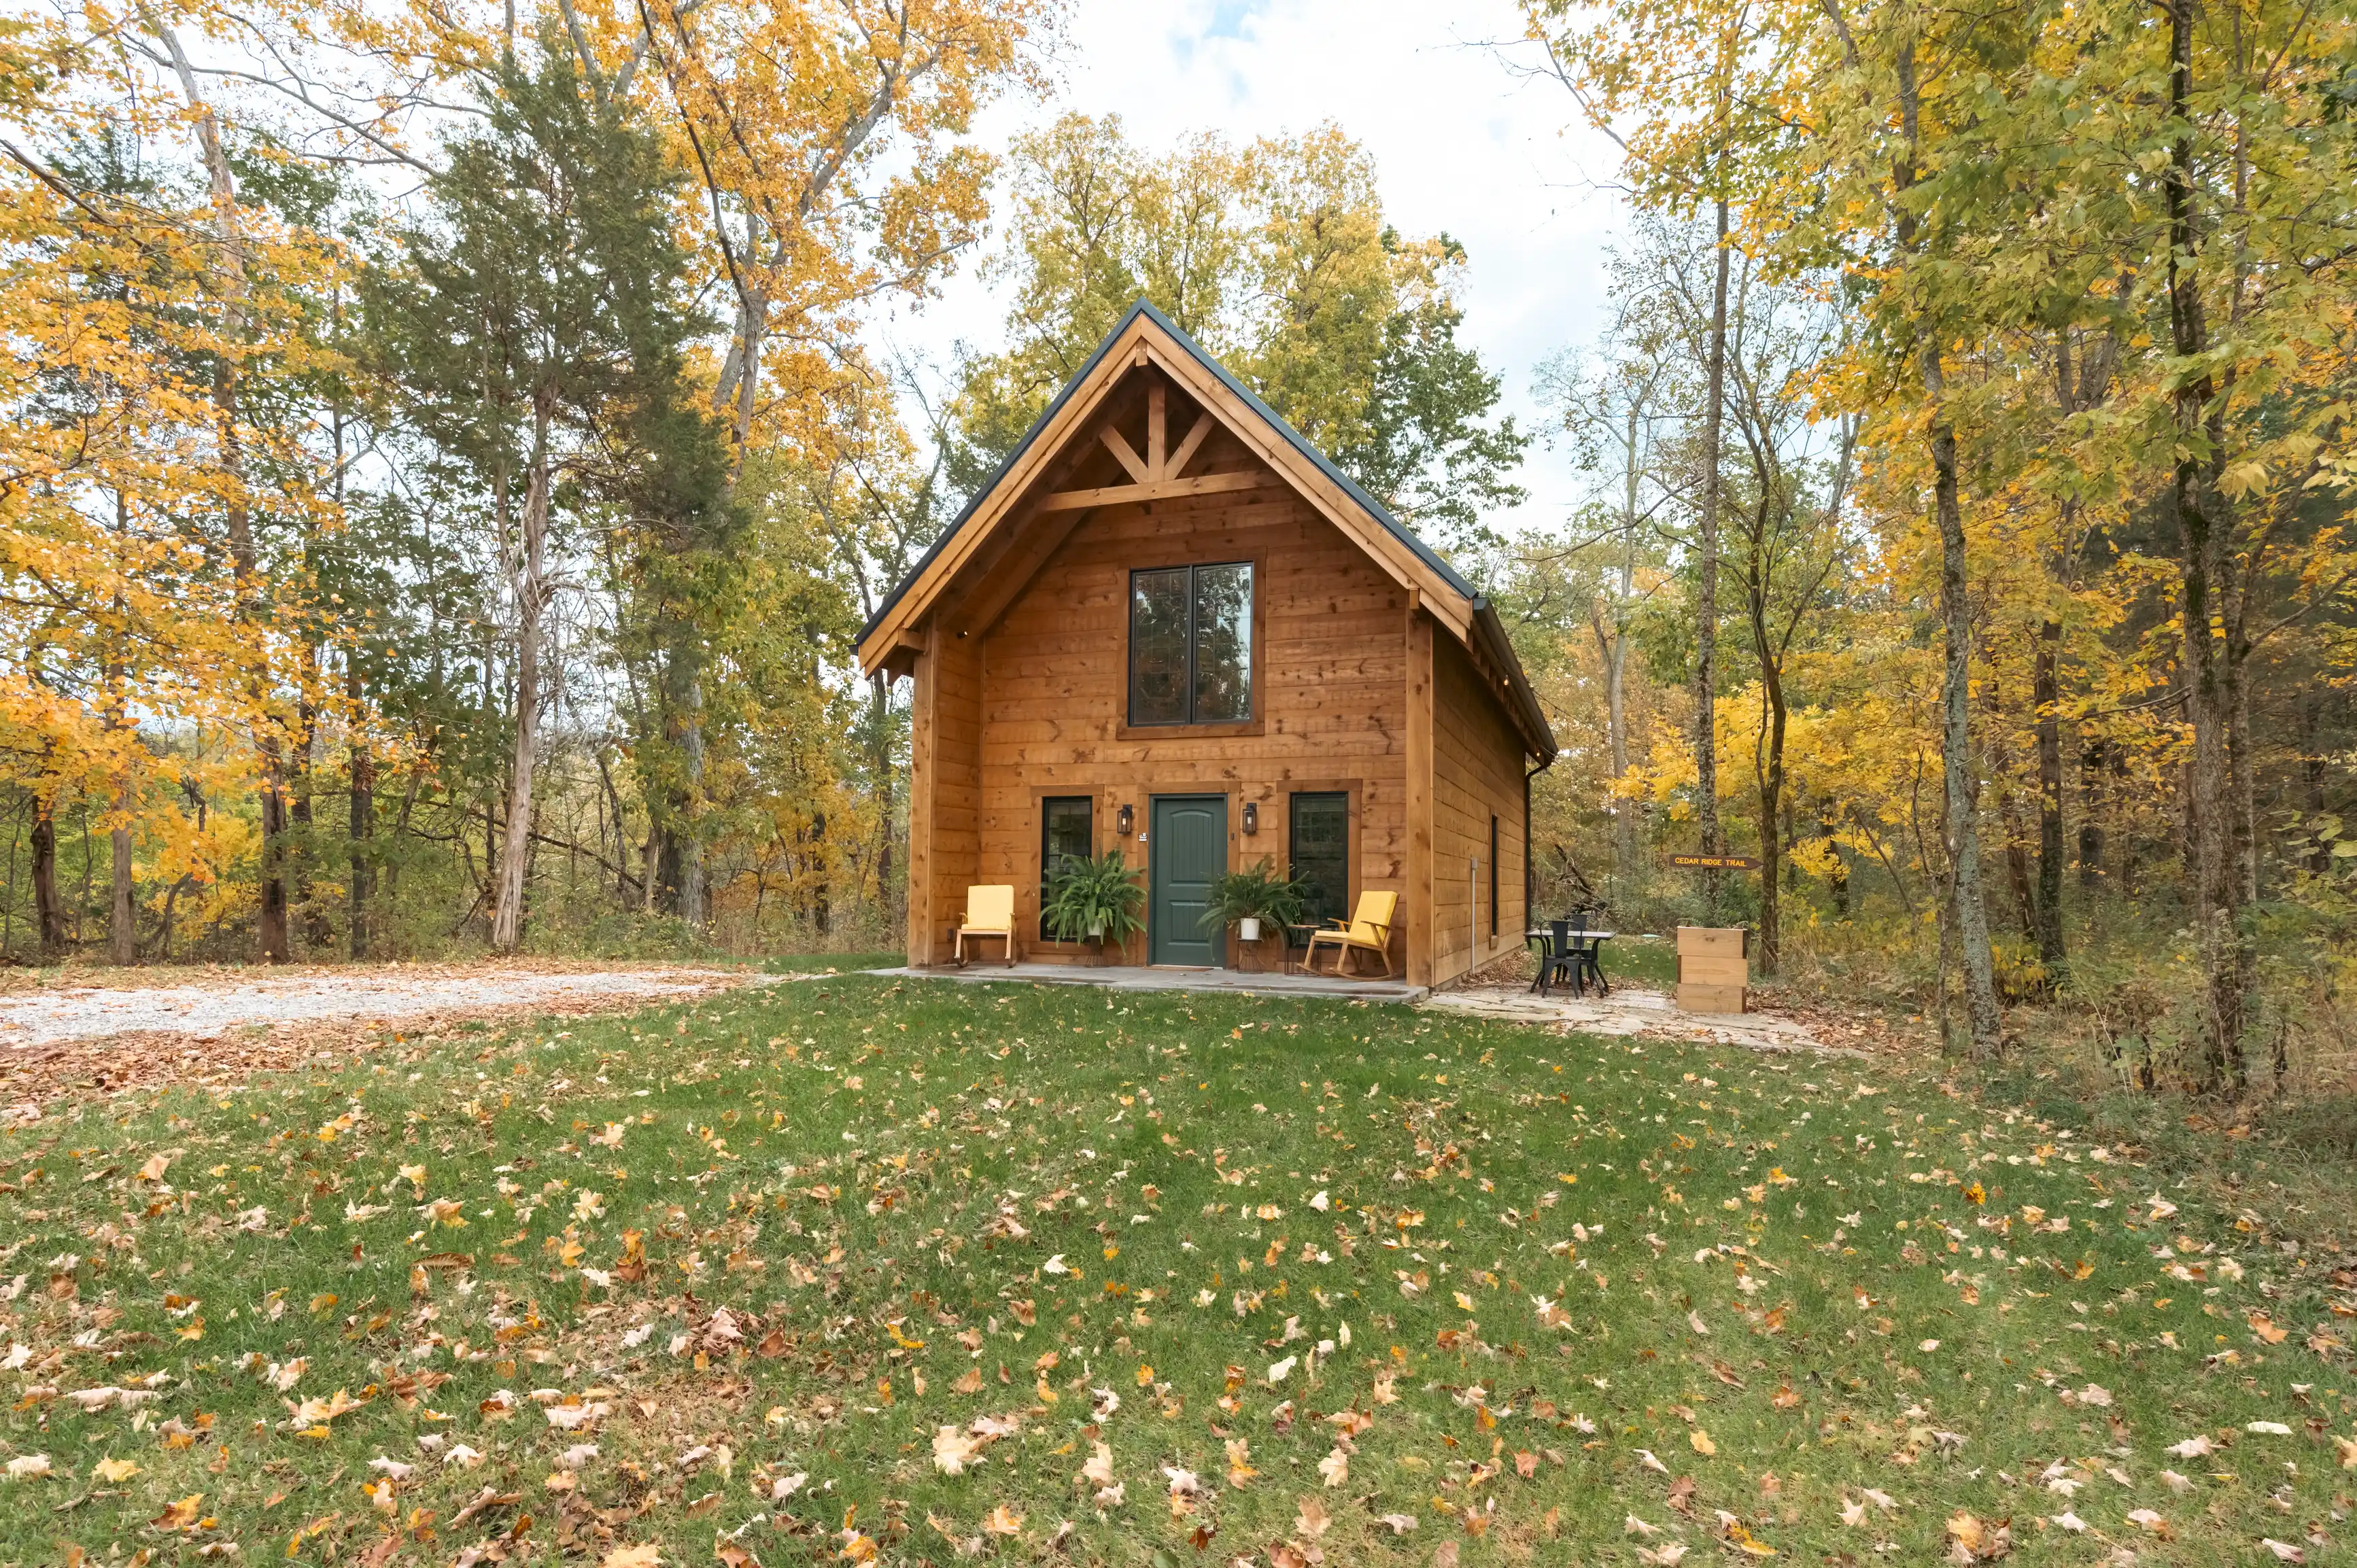 A cozy wooden cabin surrounded by autumnal trees with fallen leaves on the ground.